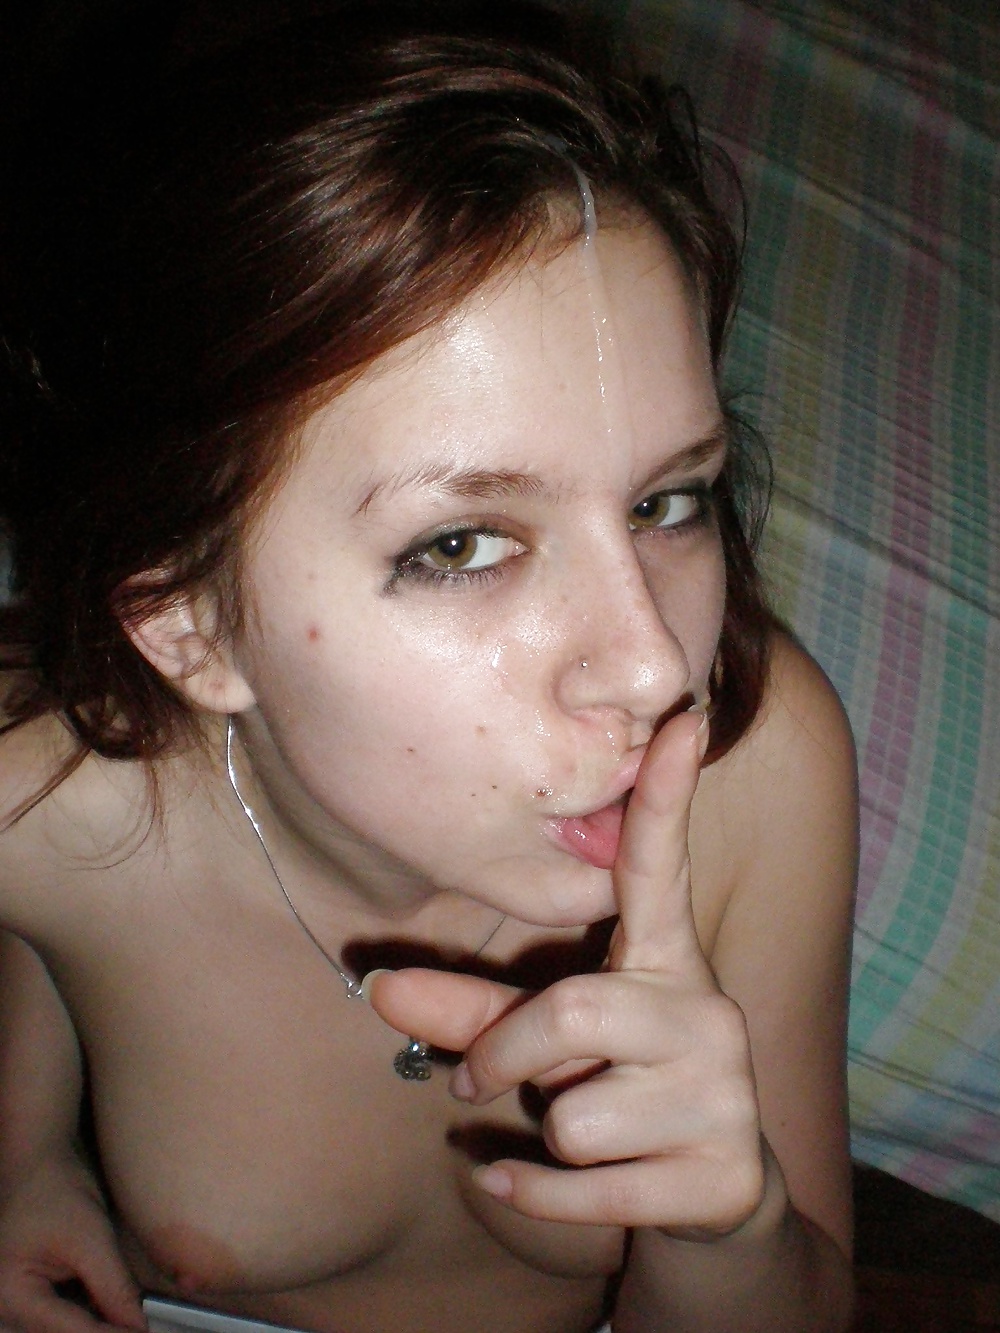 Girl who likes dick adult photos